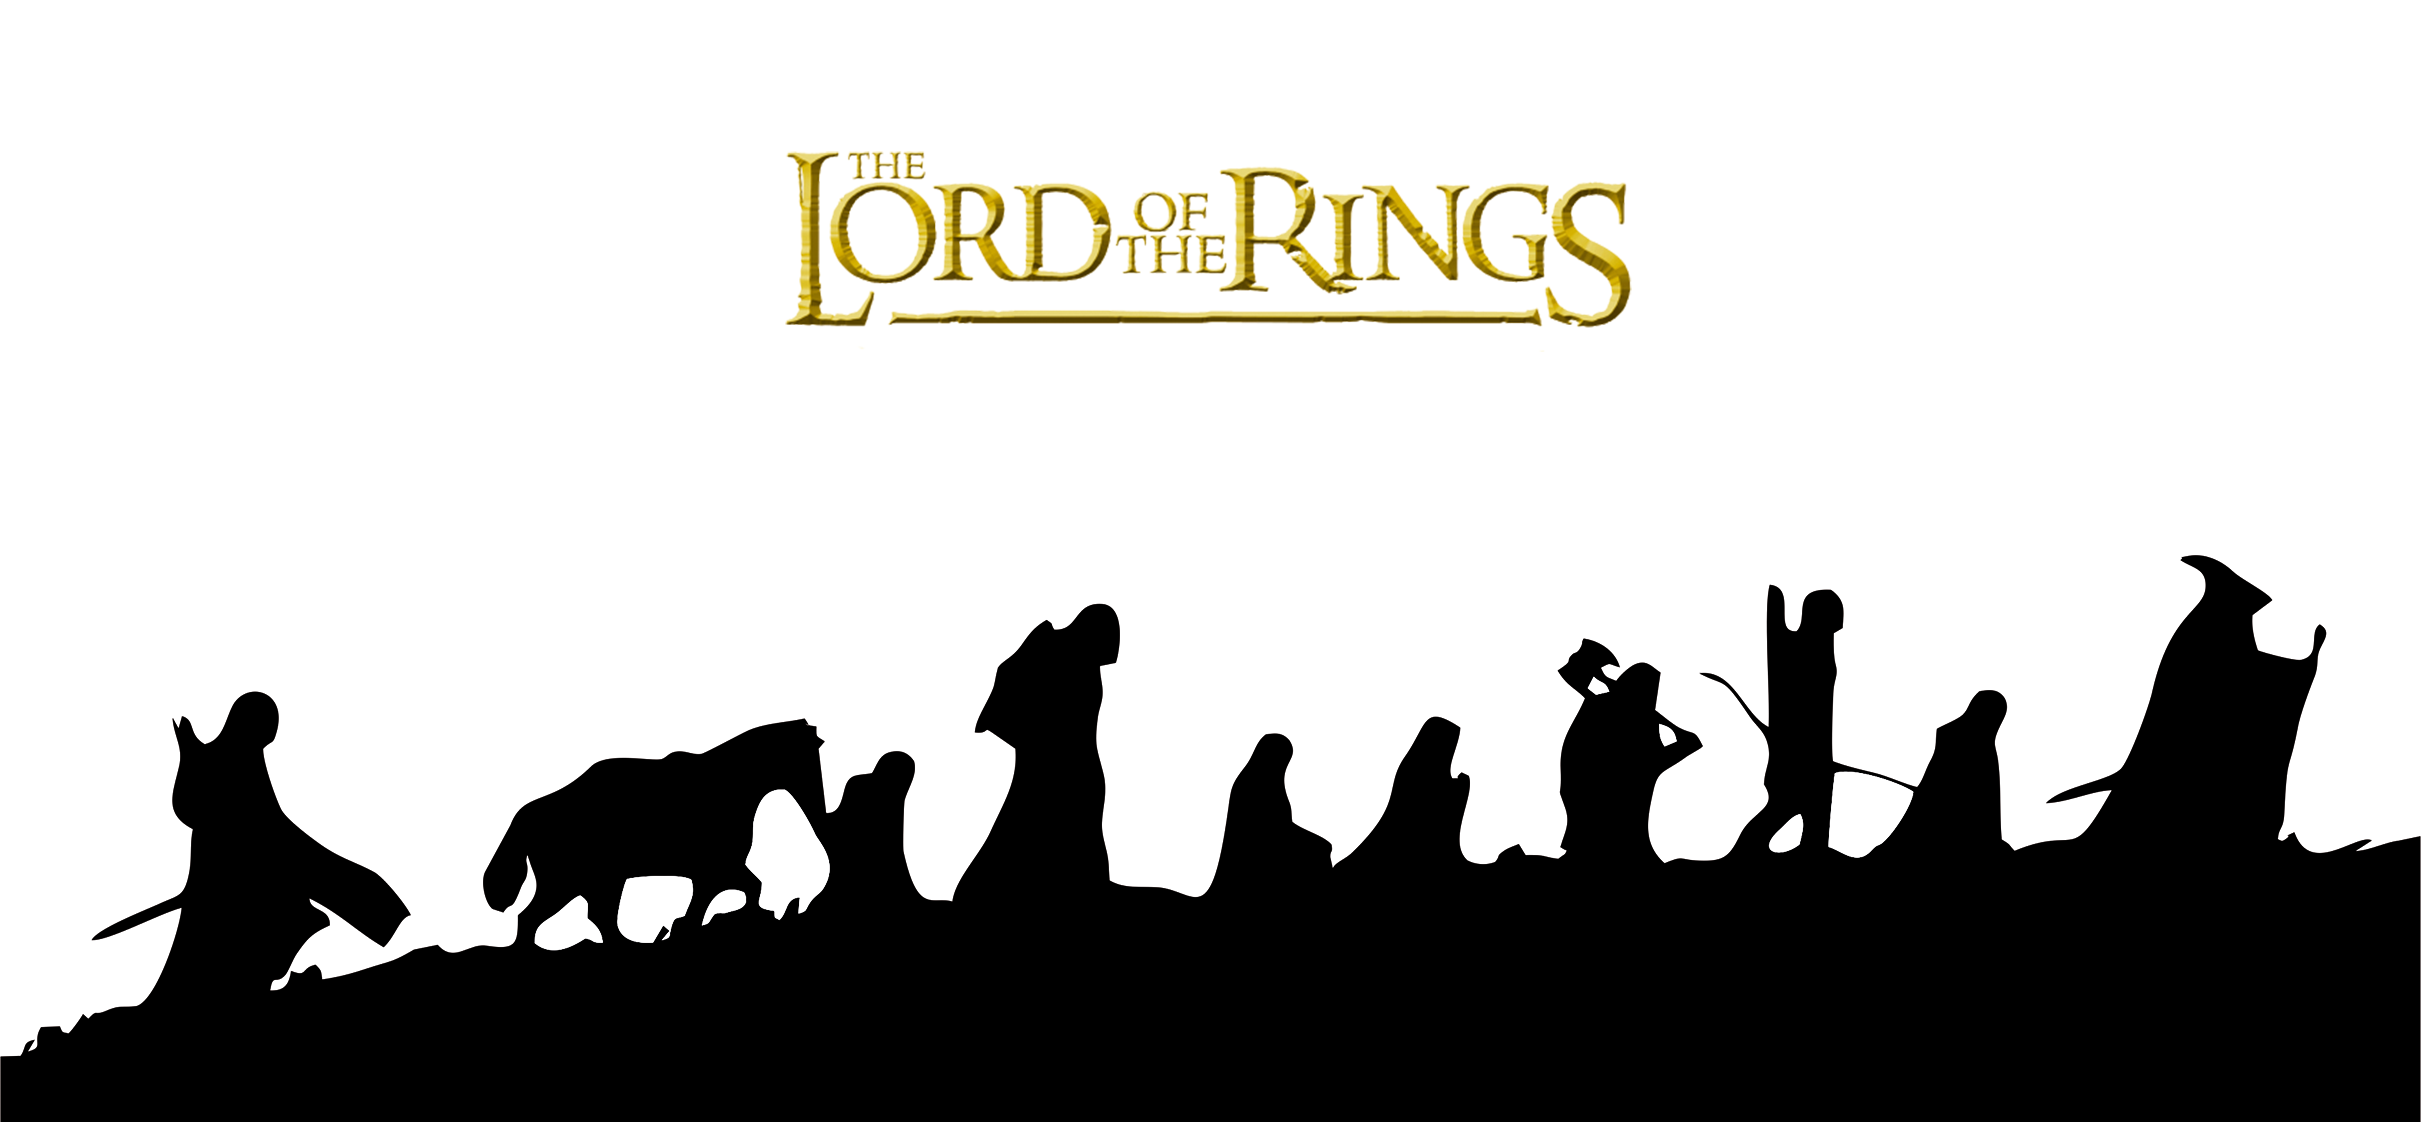 ARTE CANECA THE LORD OF THE RINGS - CLUBE DAS ESTAMPAS.png